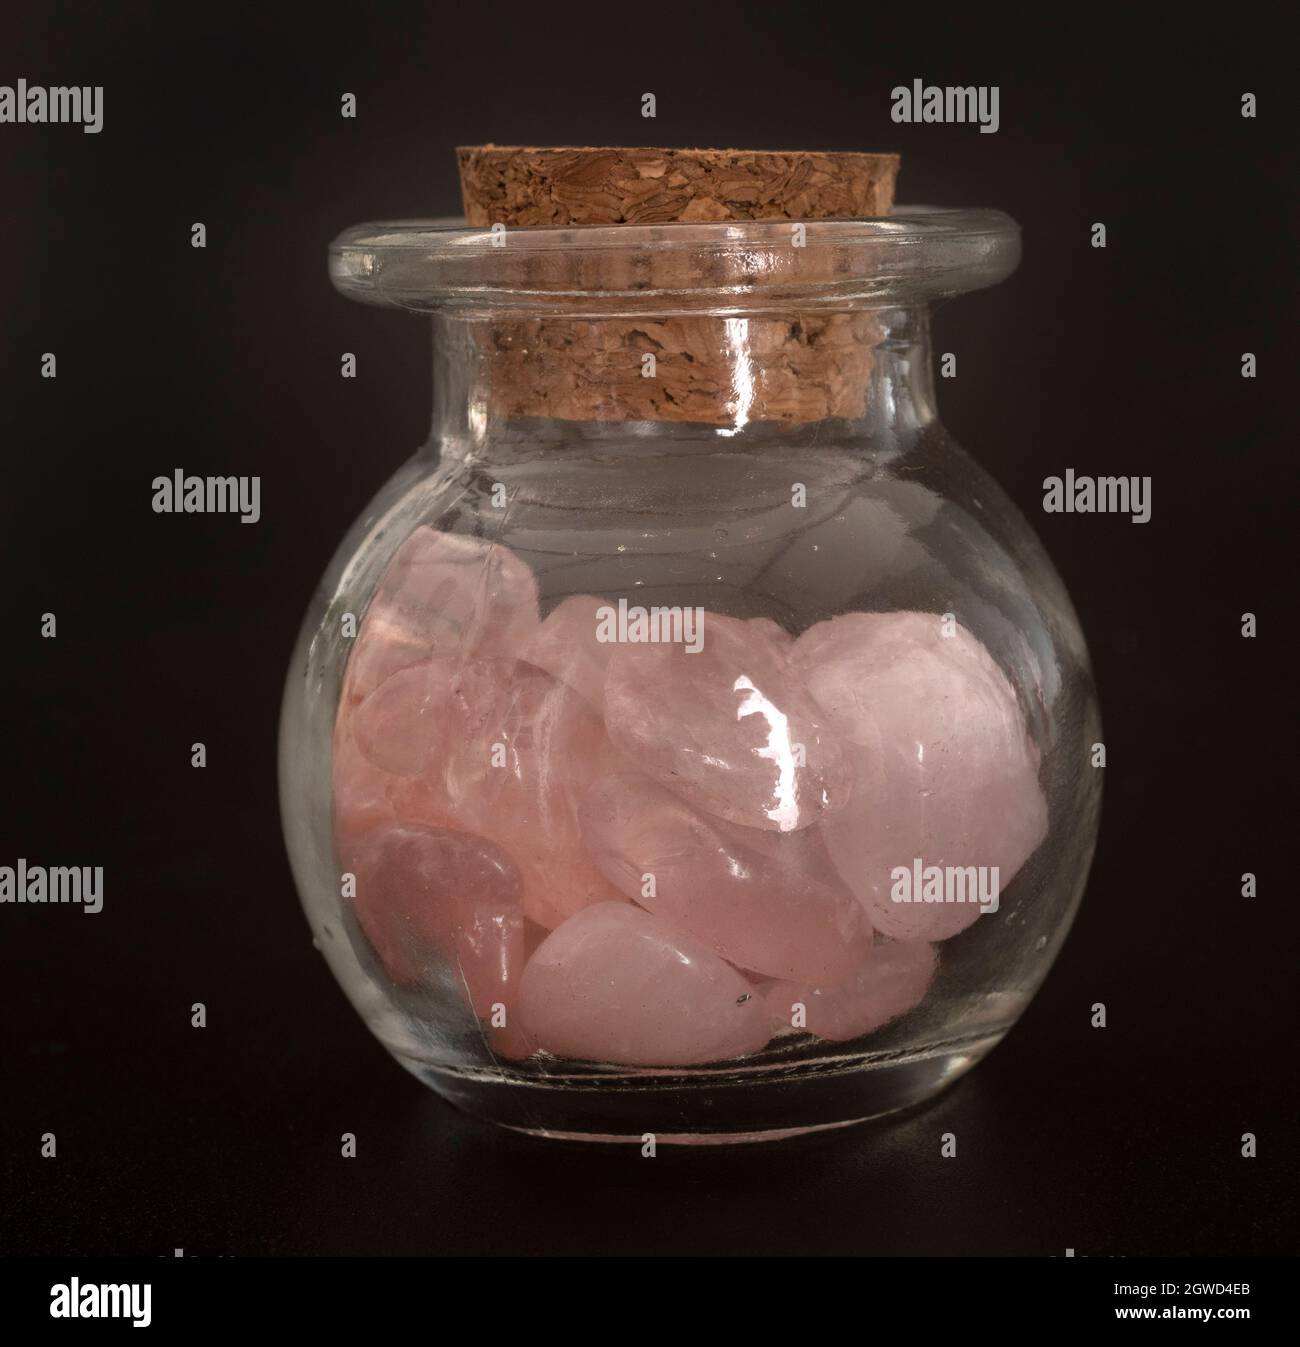 Close-up Of Stones In Glass Jar On Table Against Black Background Stock Photo